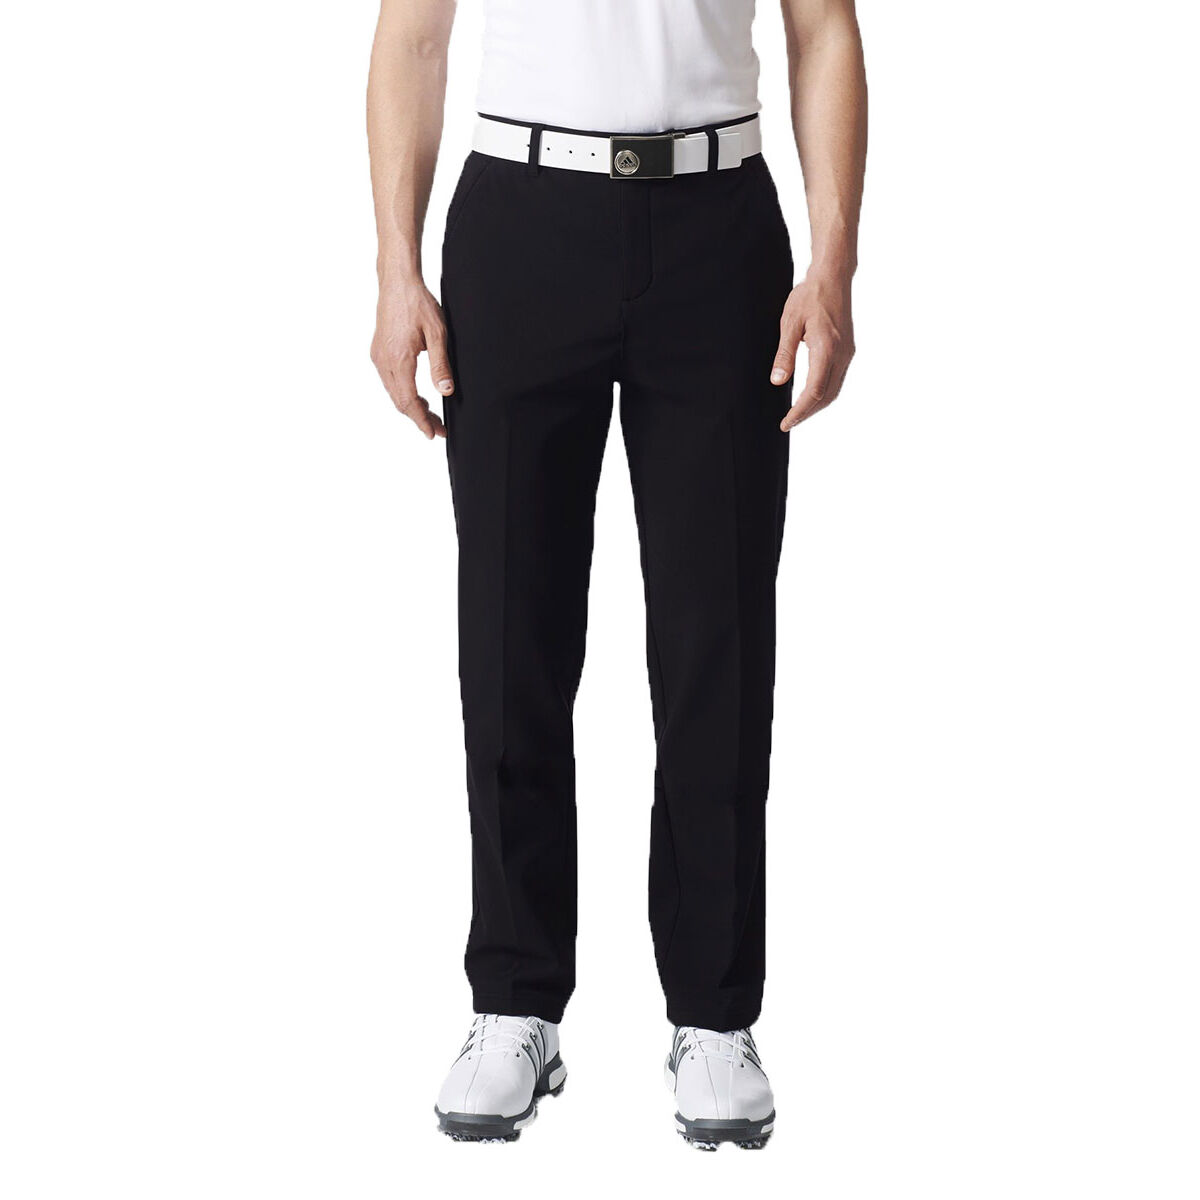 adidas climawarm golf trousers